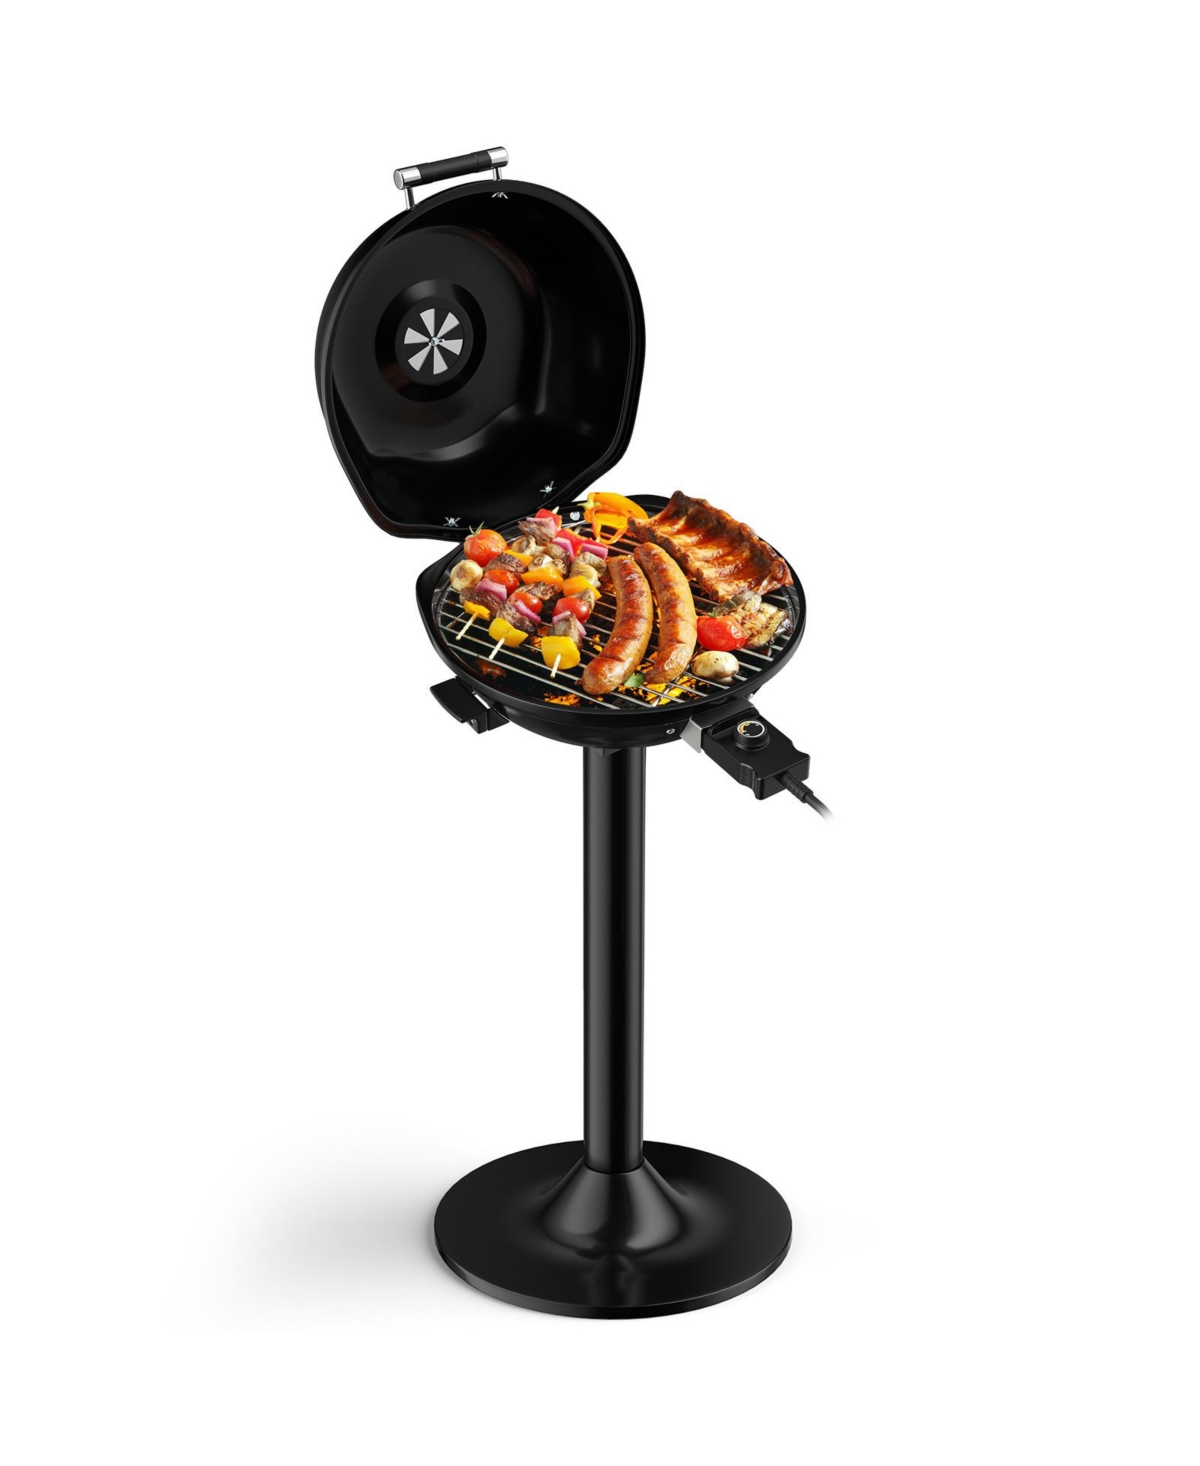 1600W Portable Electric Bbq Grill with Removable Non-Stick Rack - Black